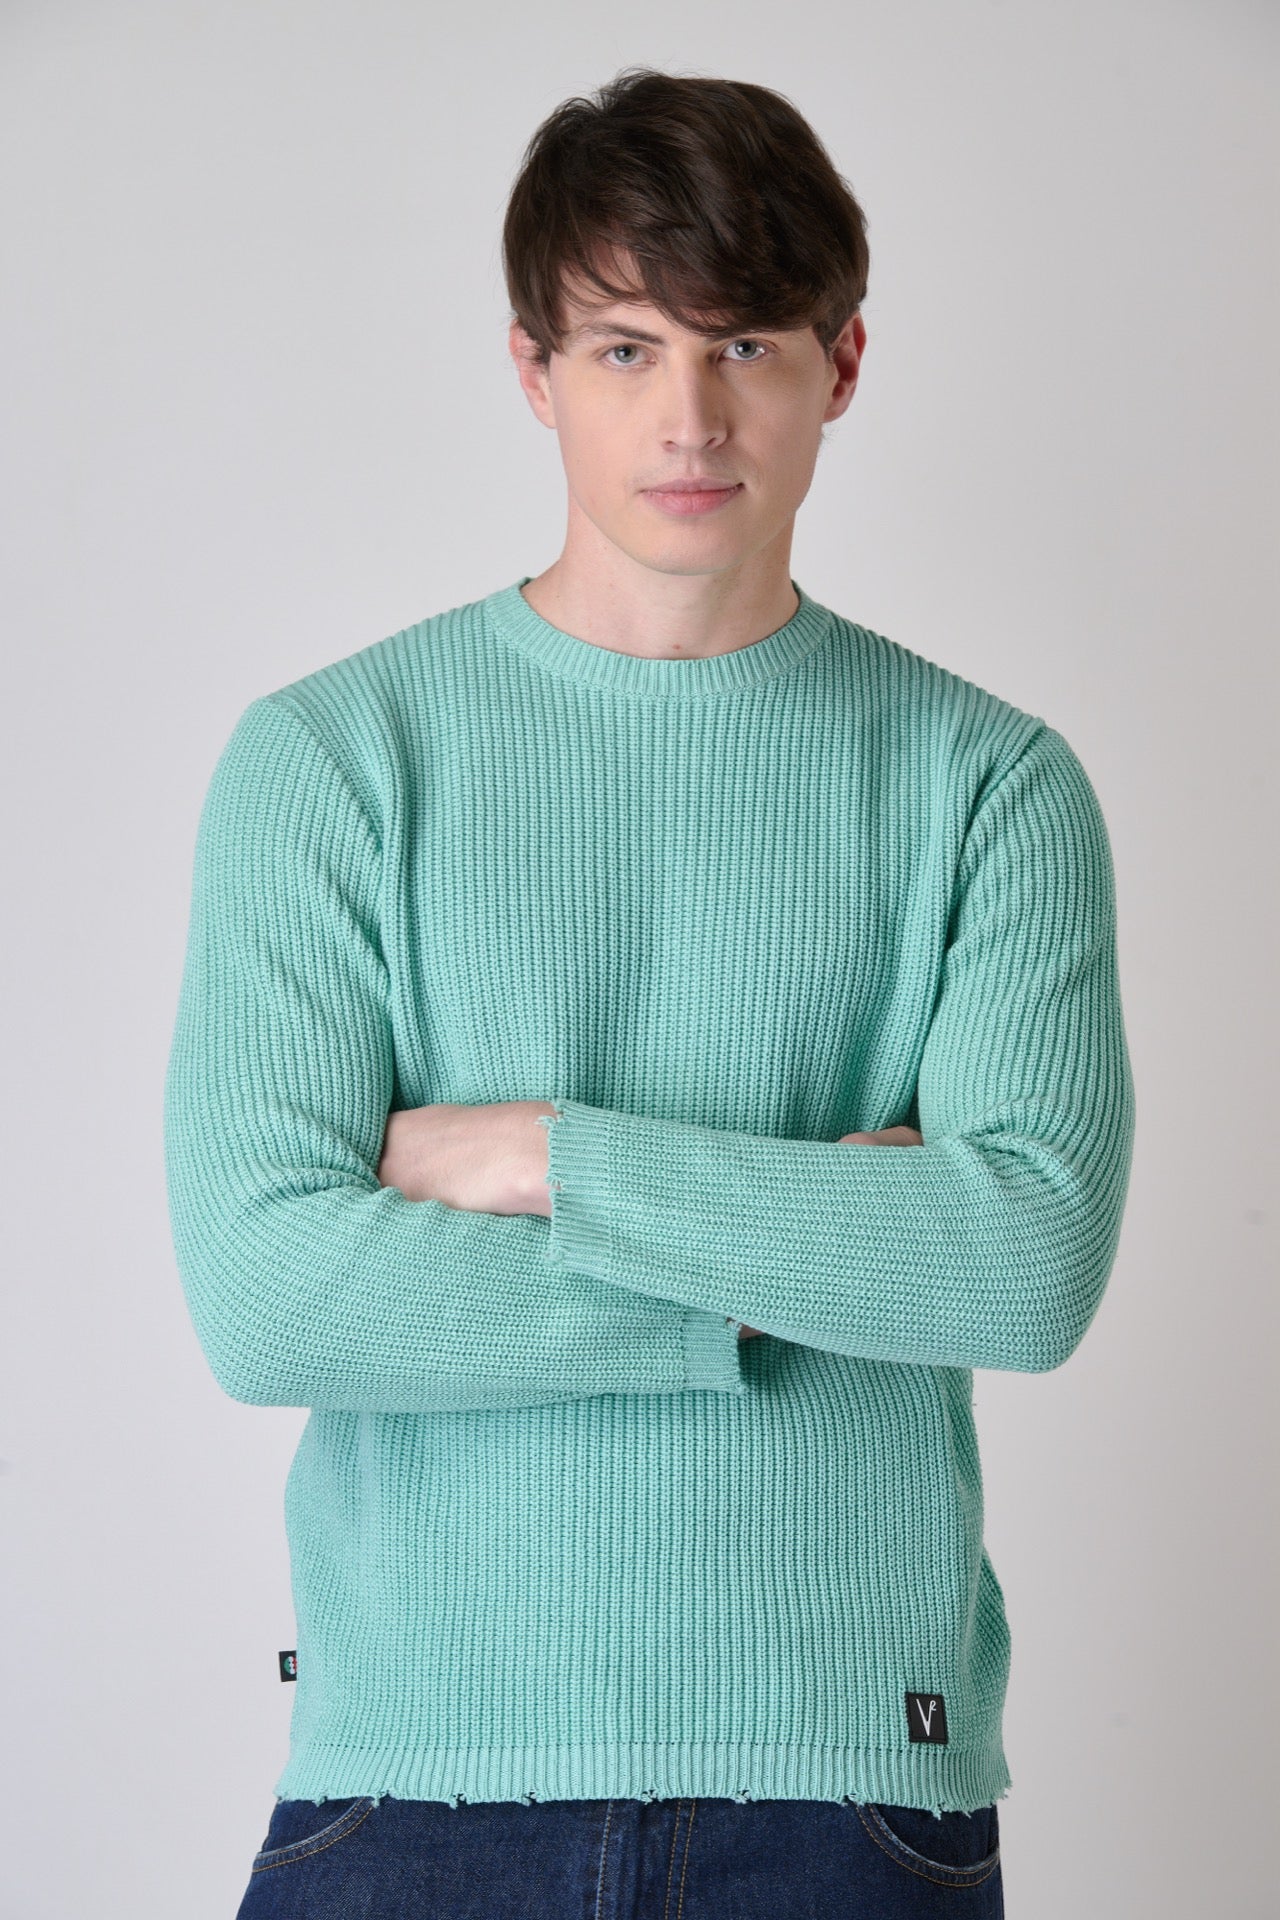 Mint Green crew neck sweater with tears